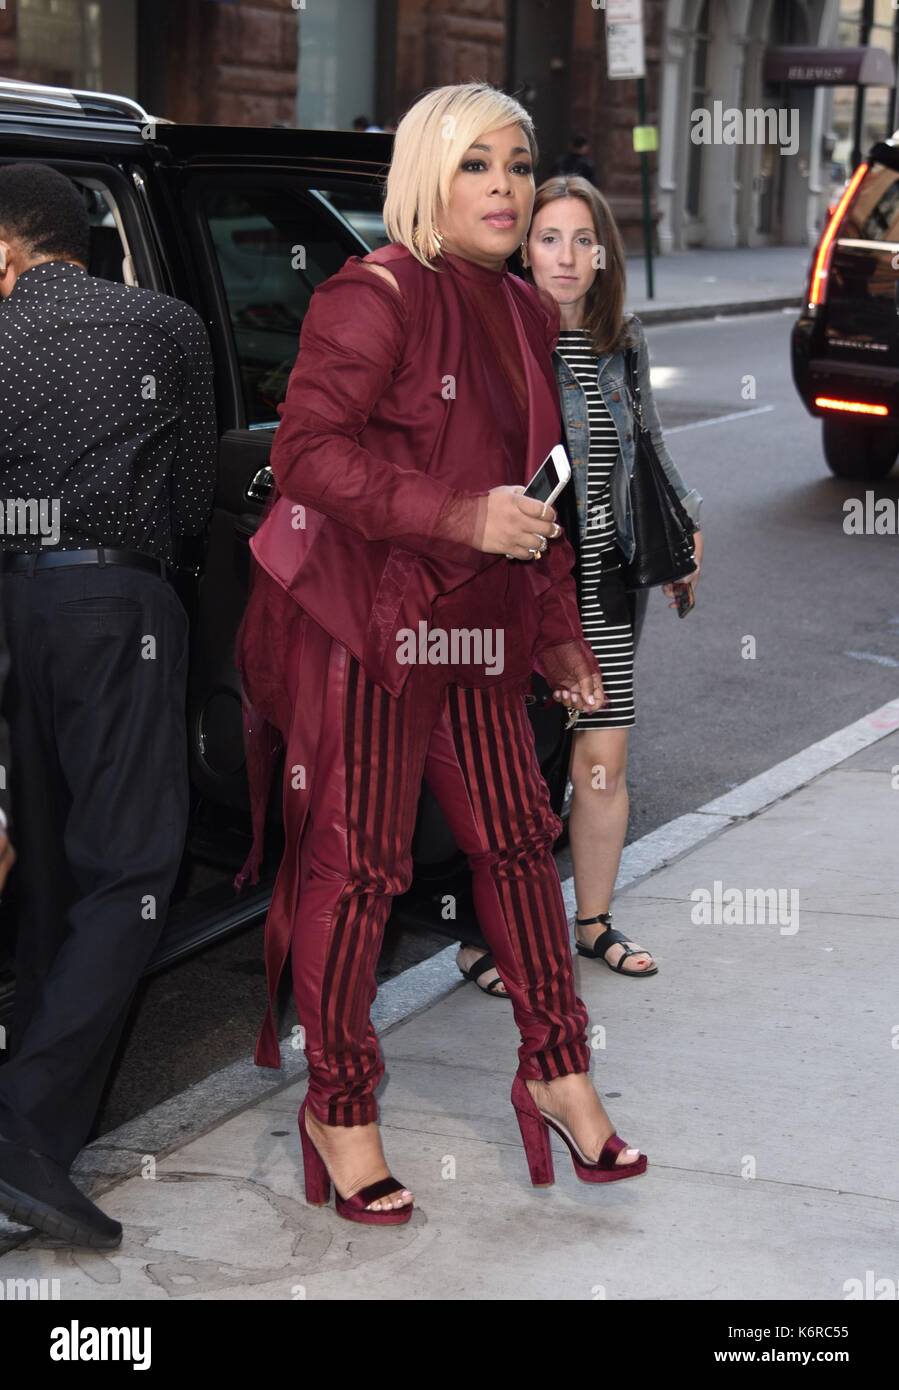 New York, NY, USA. 13th Sep, 2017. out and about for Celebrity Candids - WED, New York, NY September 13, 2017. Credit: Derek Storm/Everett Collection/Alamy Live News Stock Photo